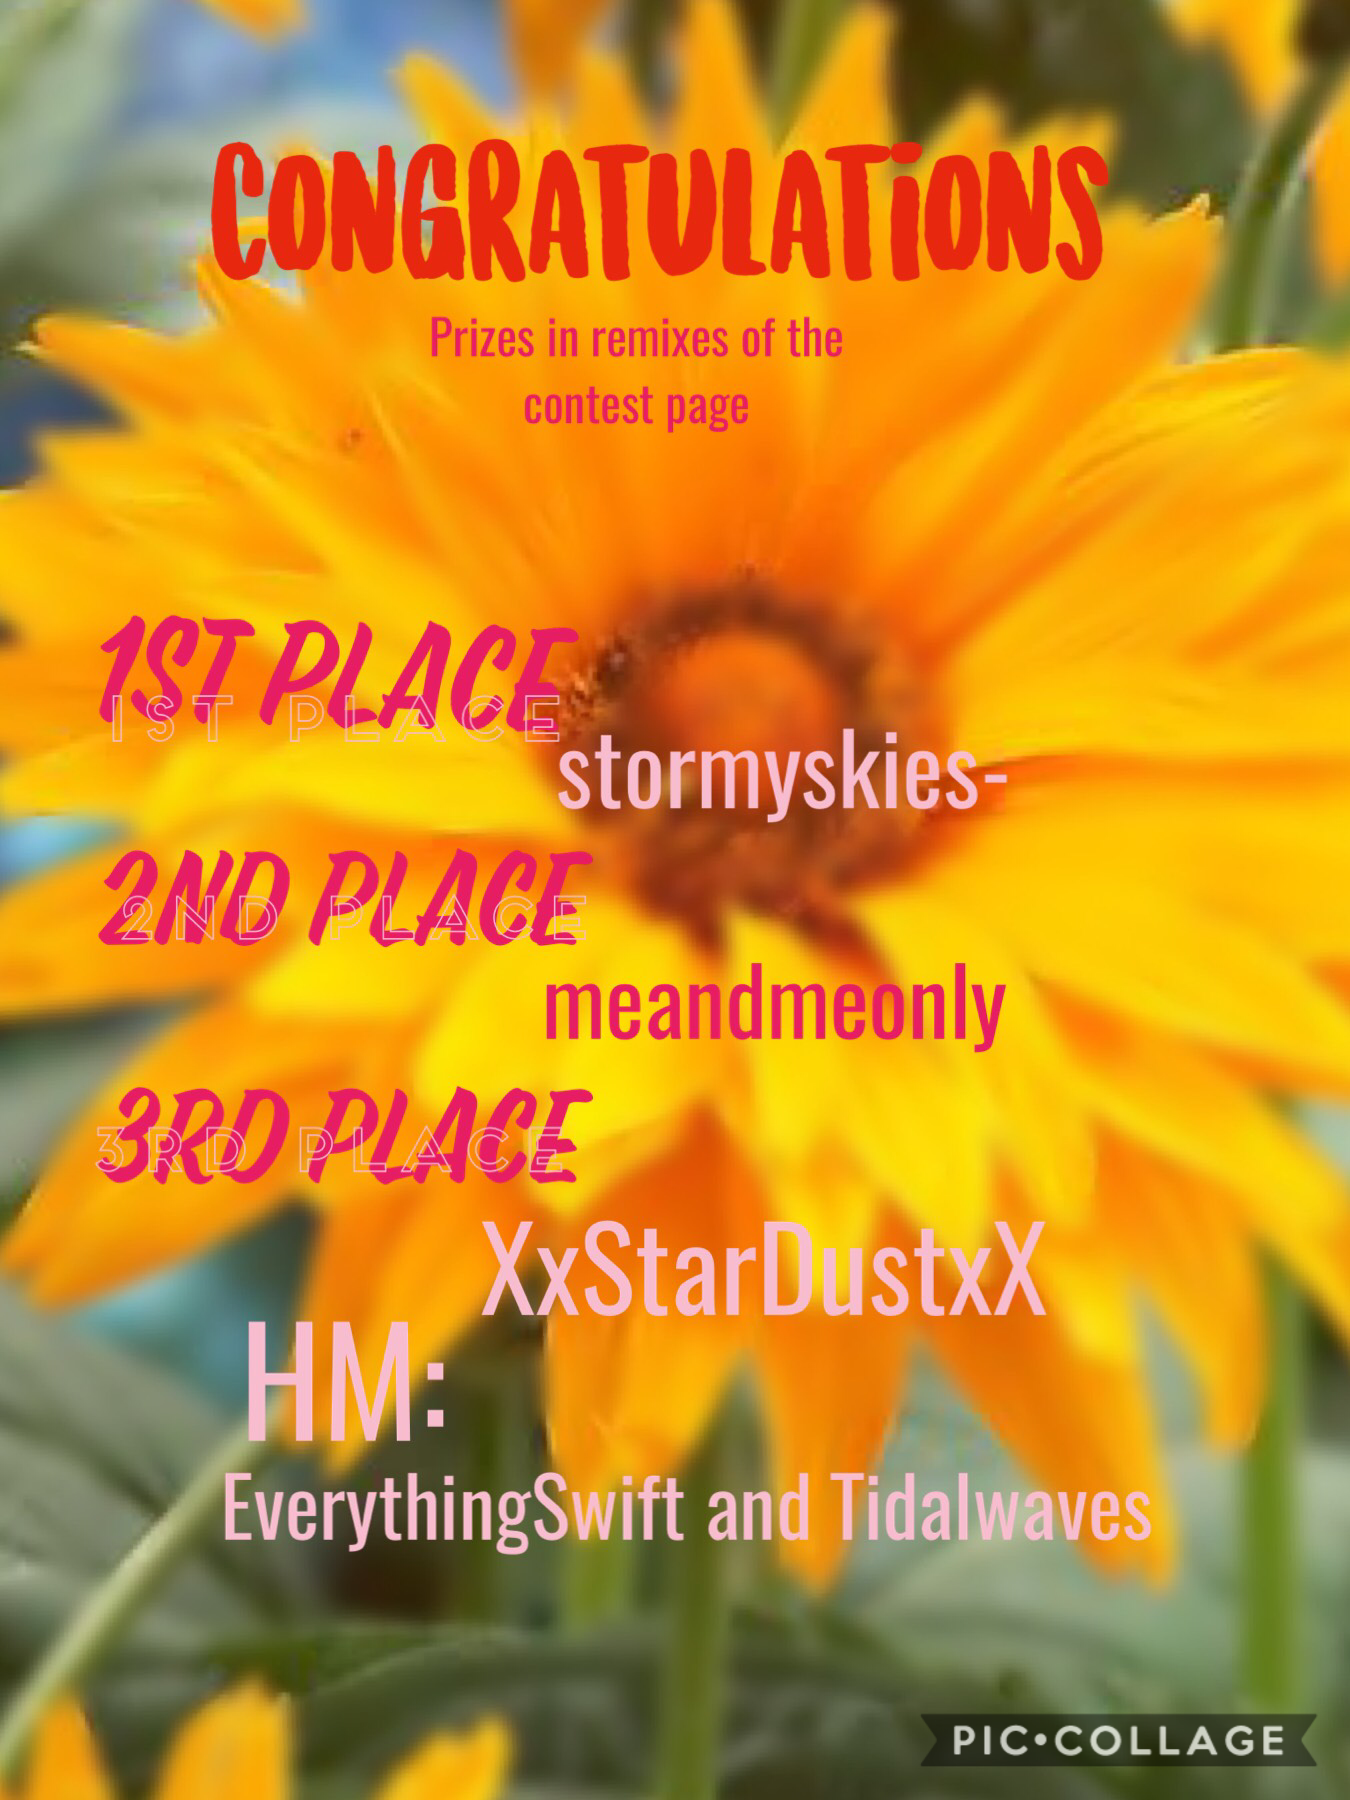 congrats!! 



remember prizes in remixes